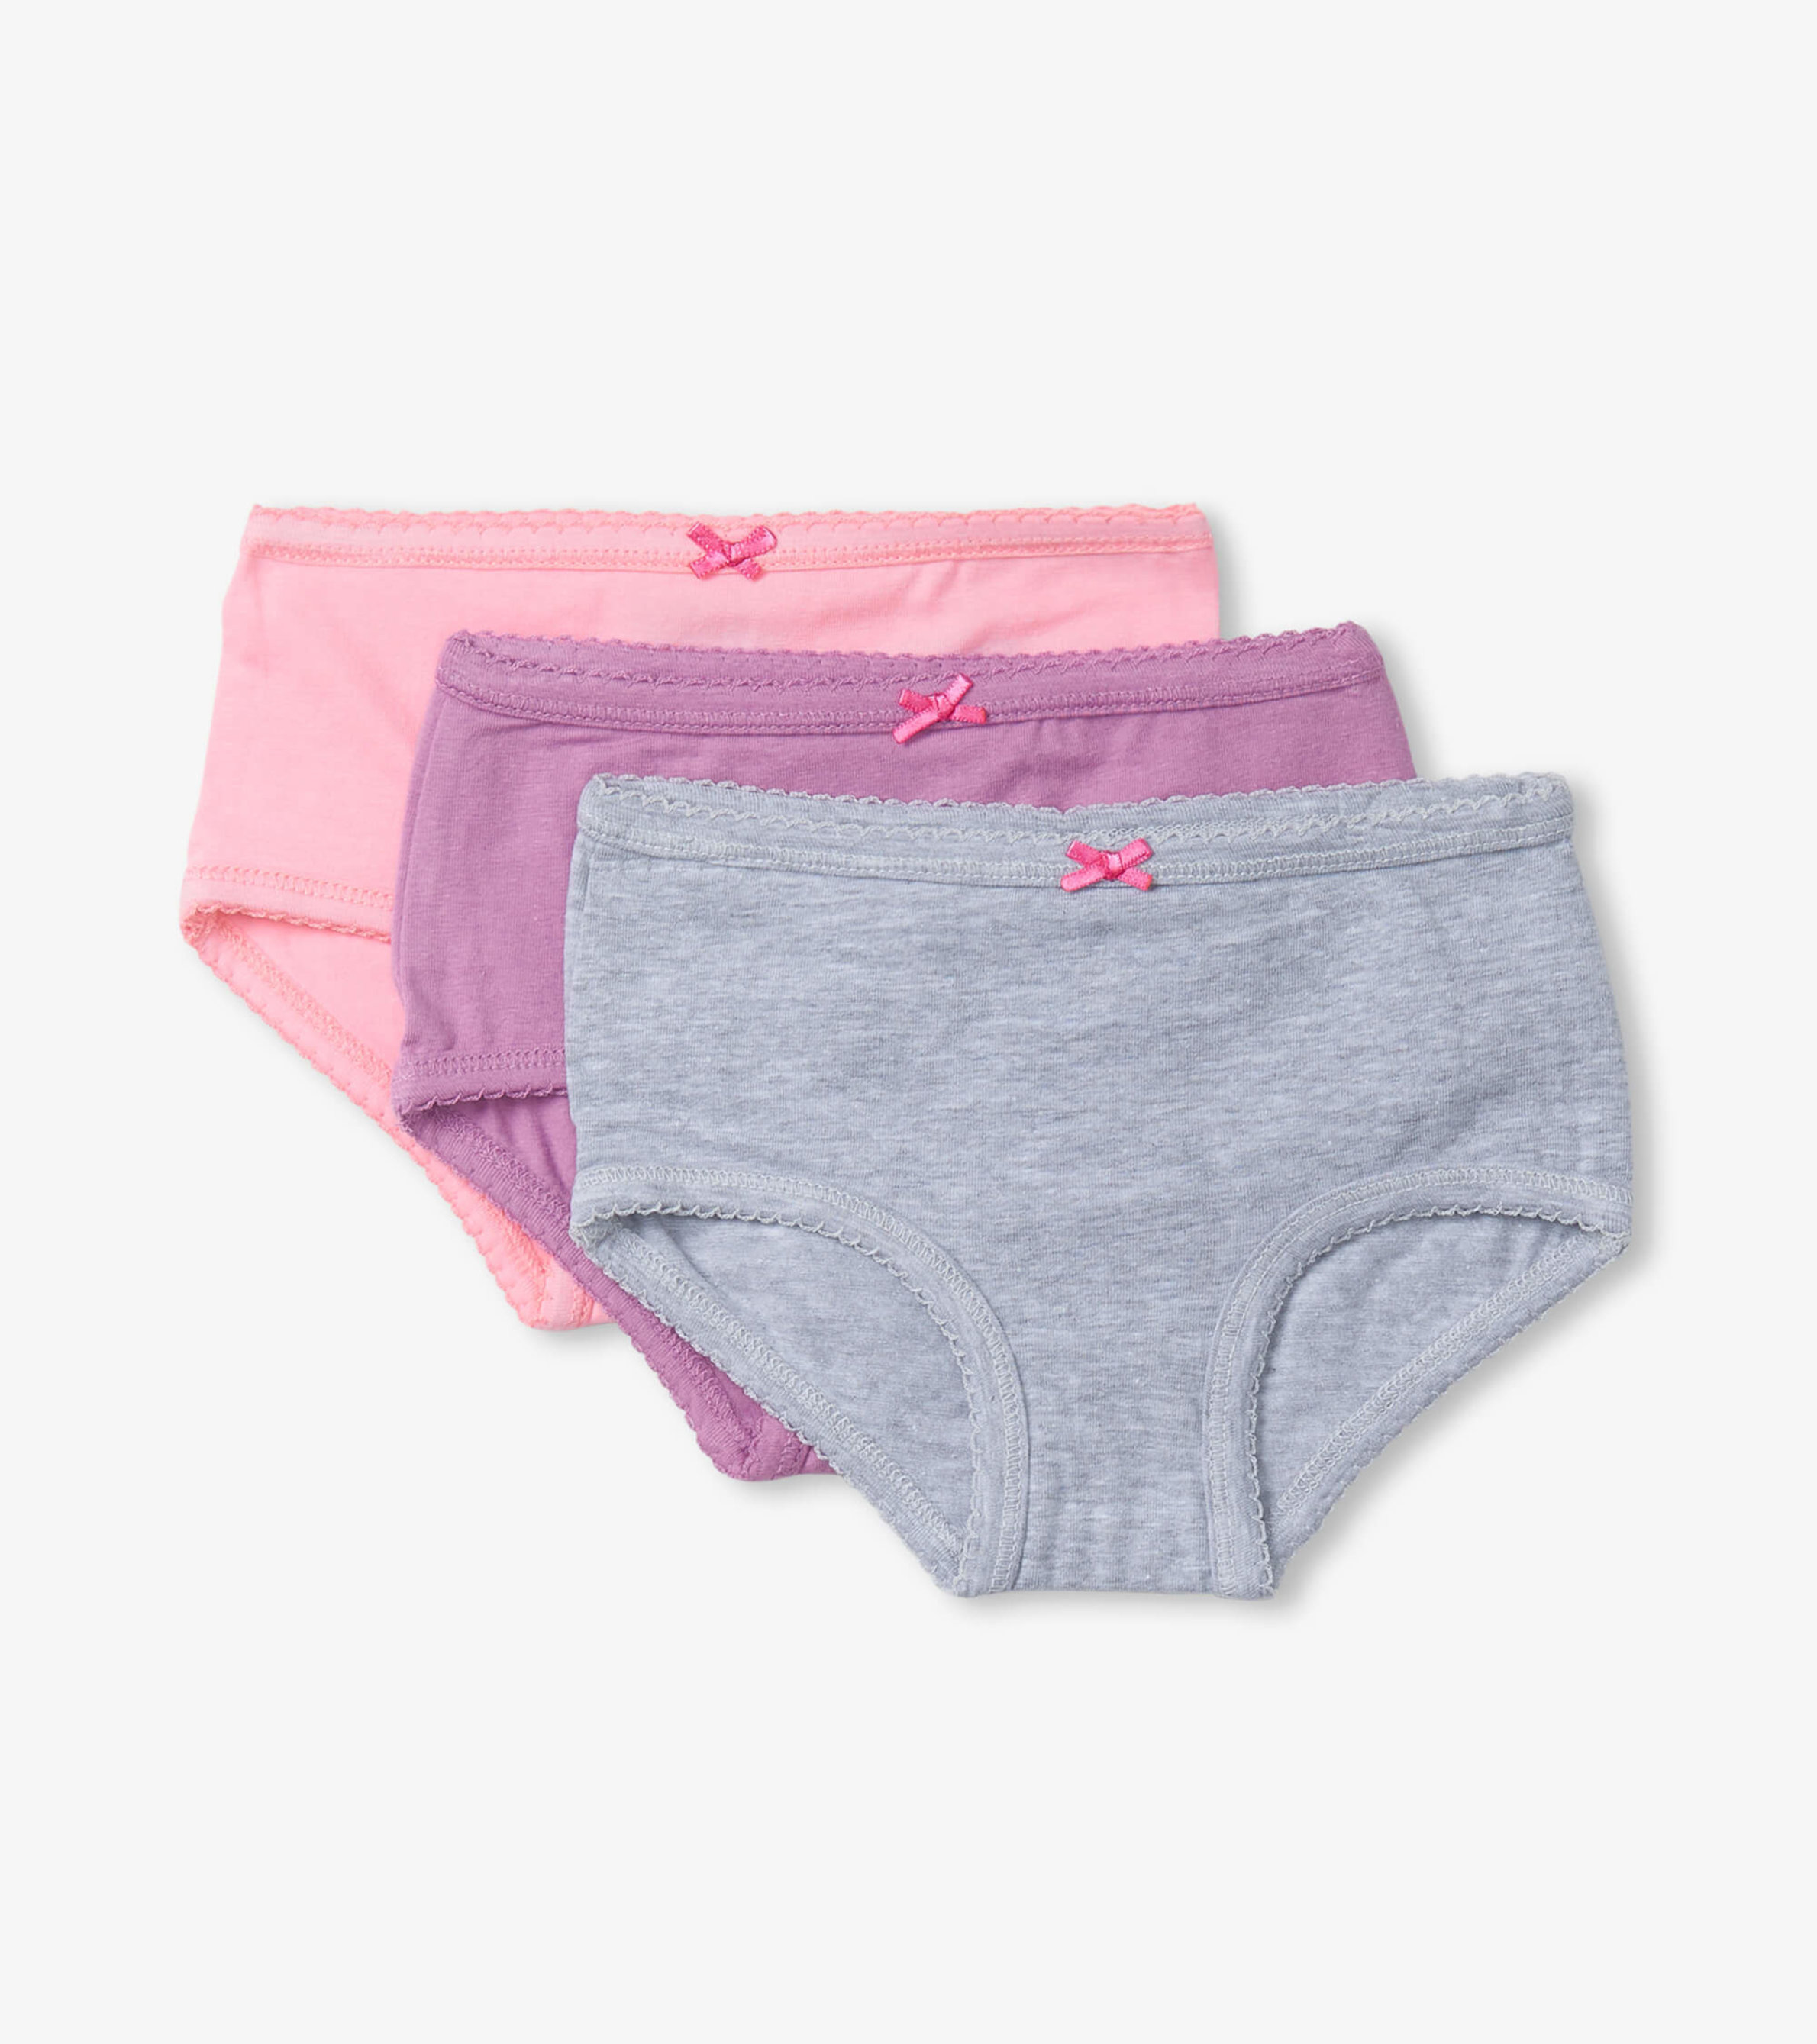 days of the week panties  Channo girls' knickers cotton for each day of  the week. Soft and comfortable fabric.